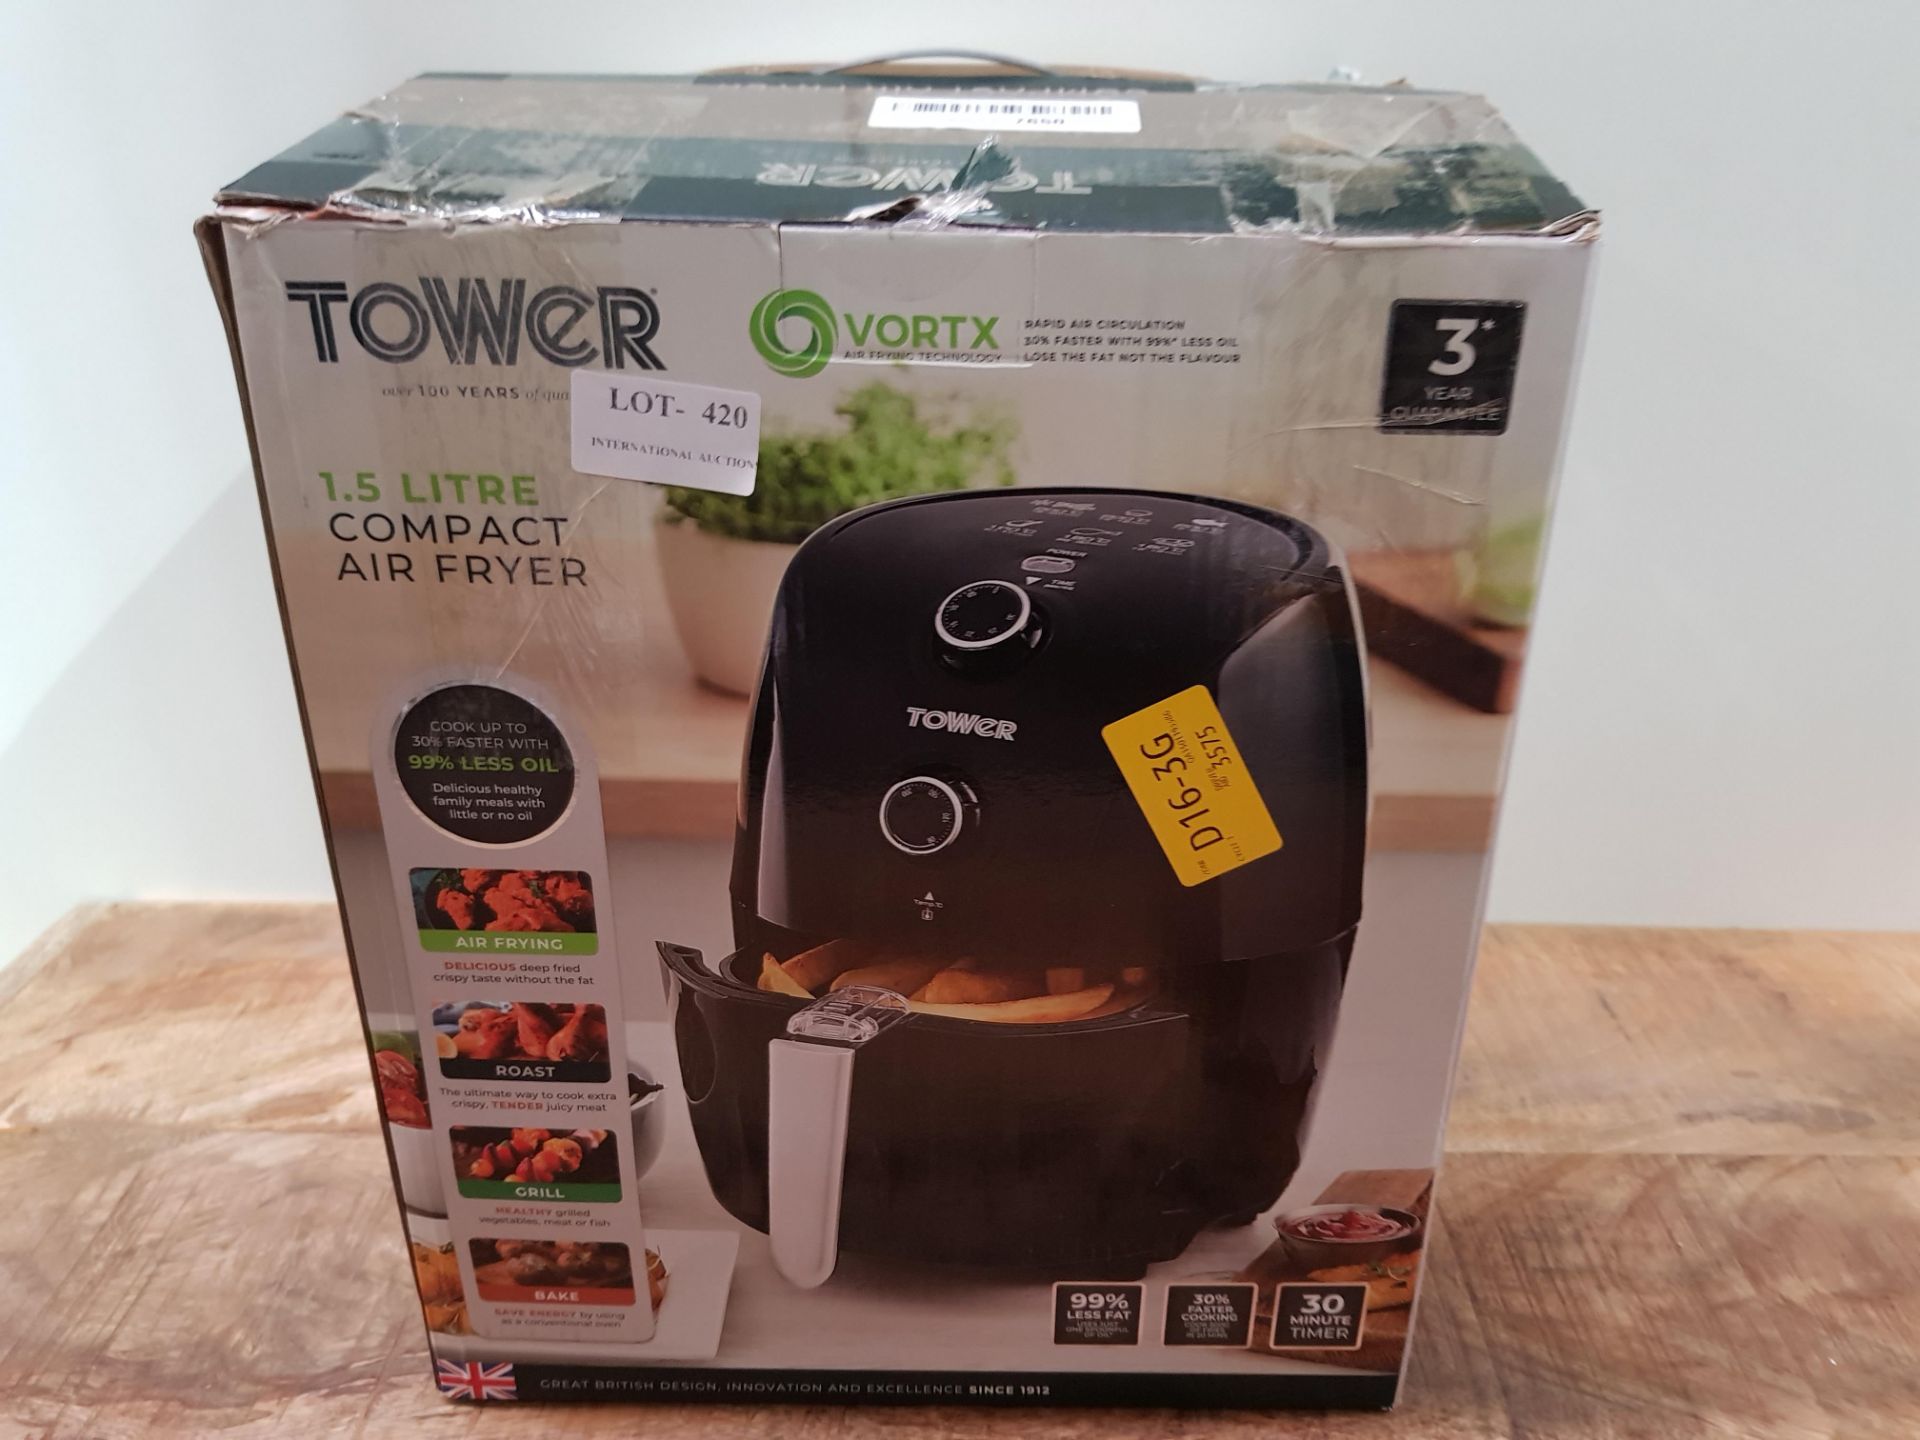 Tower T17025 Vortx Compact Air Fryer with Rapid Air Circulation, 30-Minute Timer, 1.5 Litre, 900W,